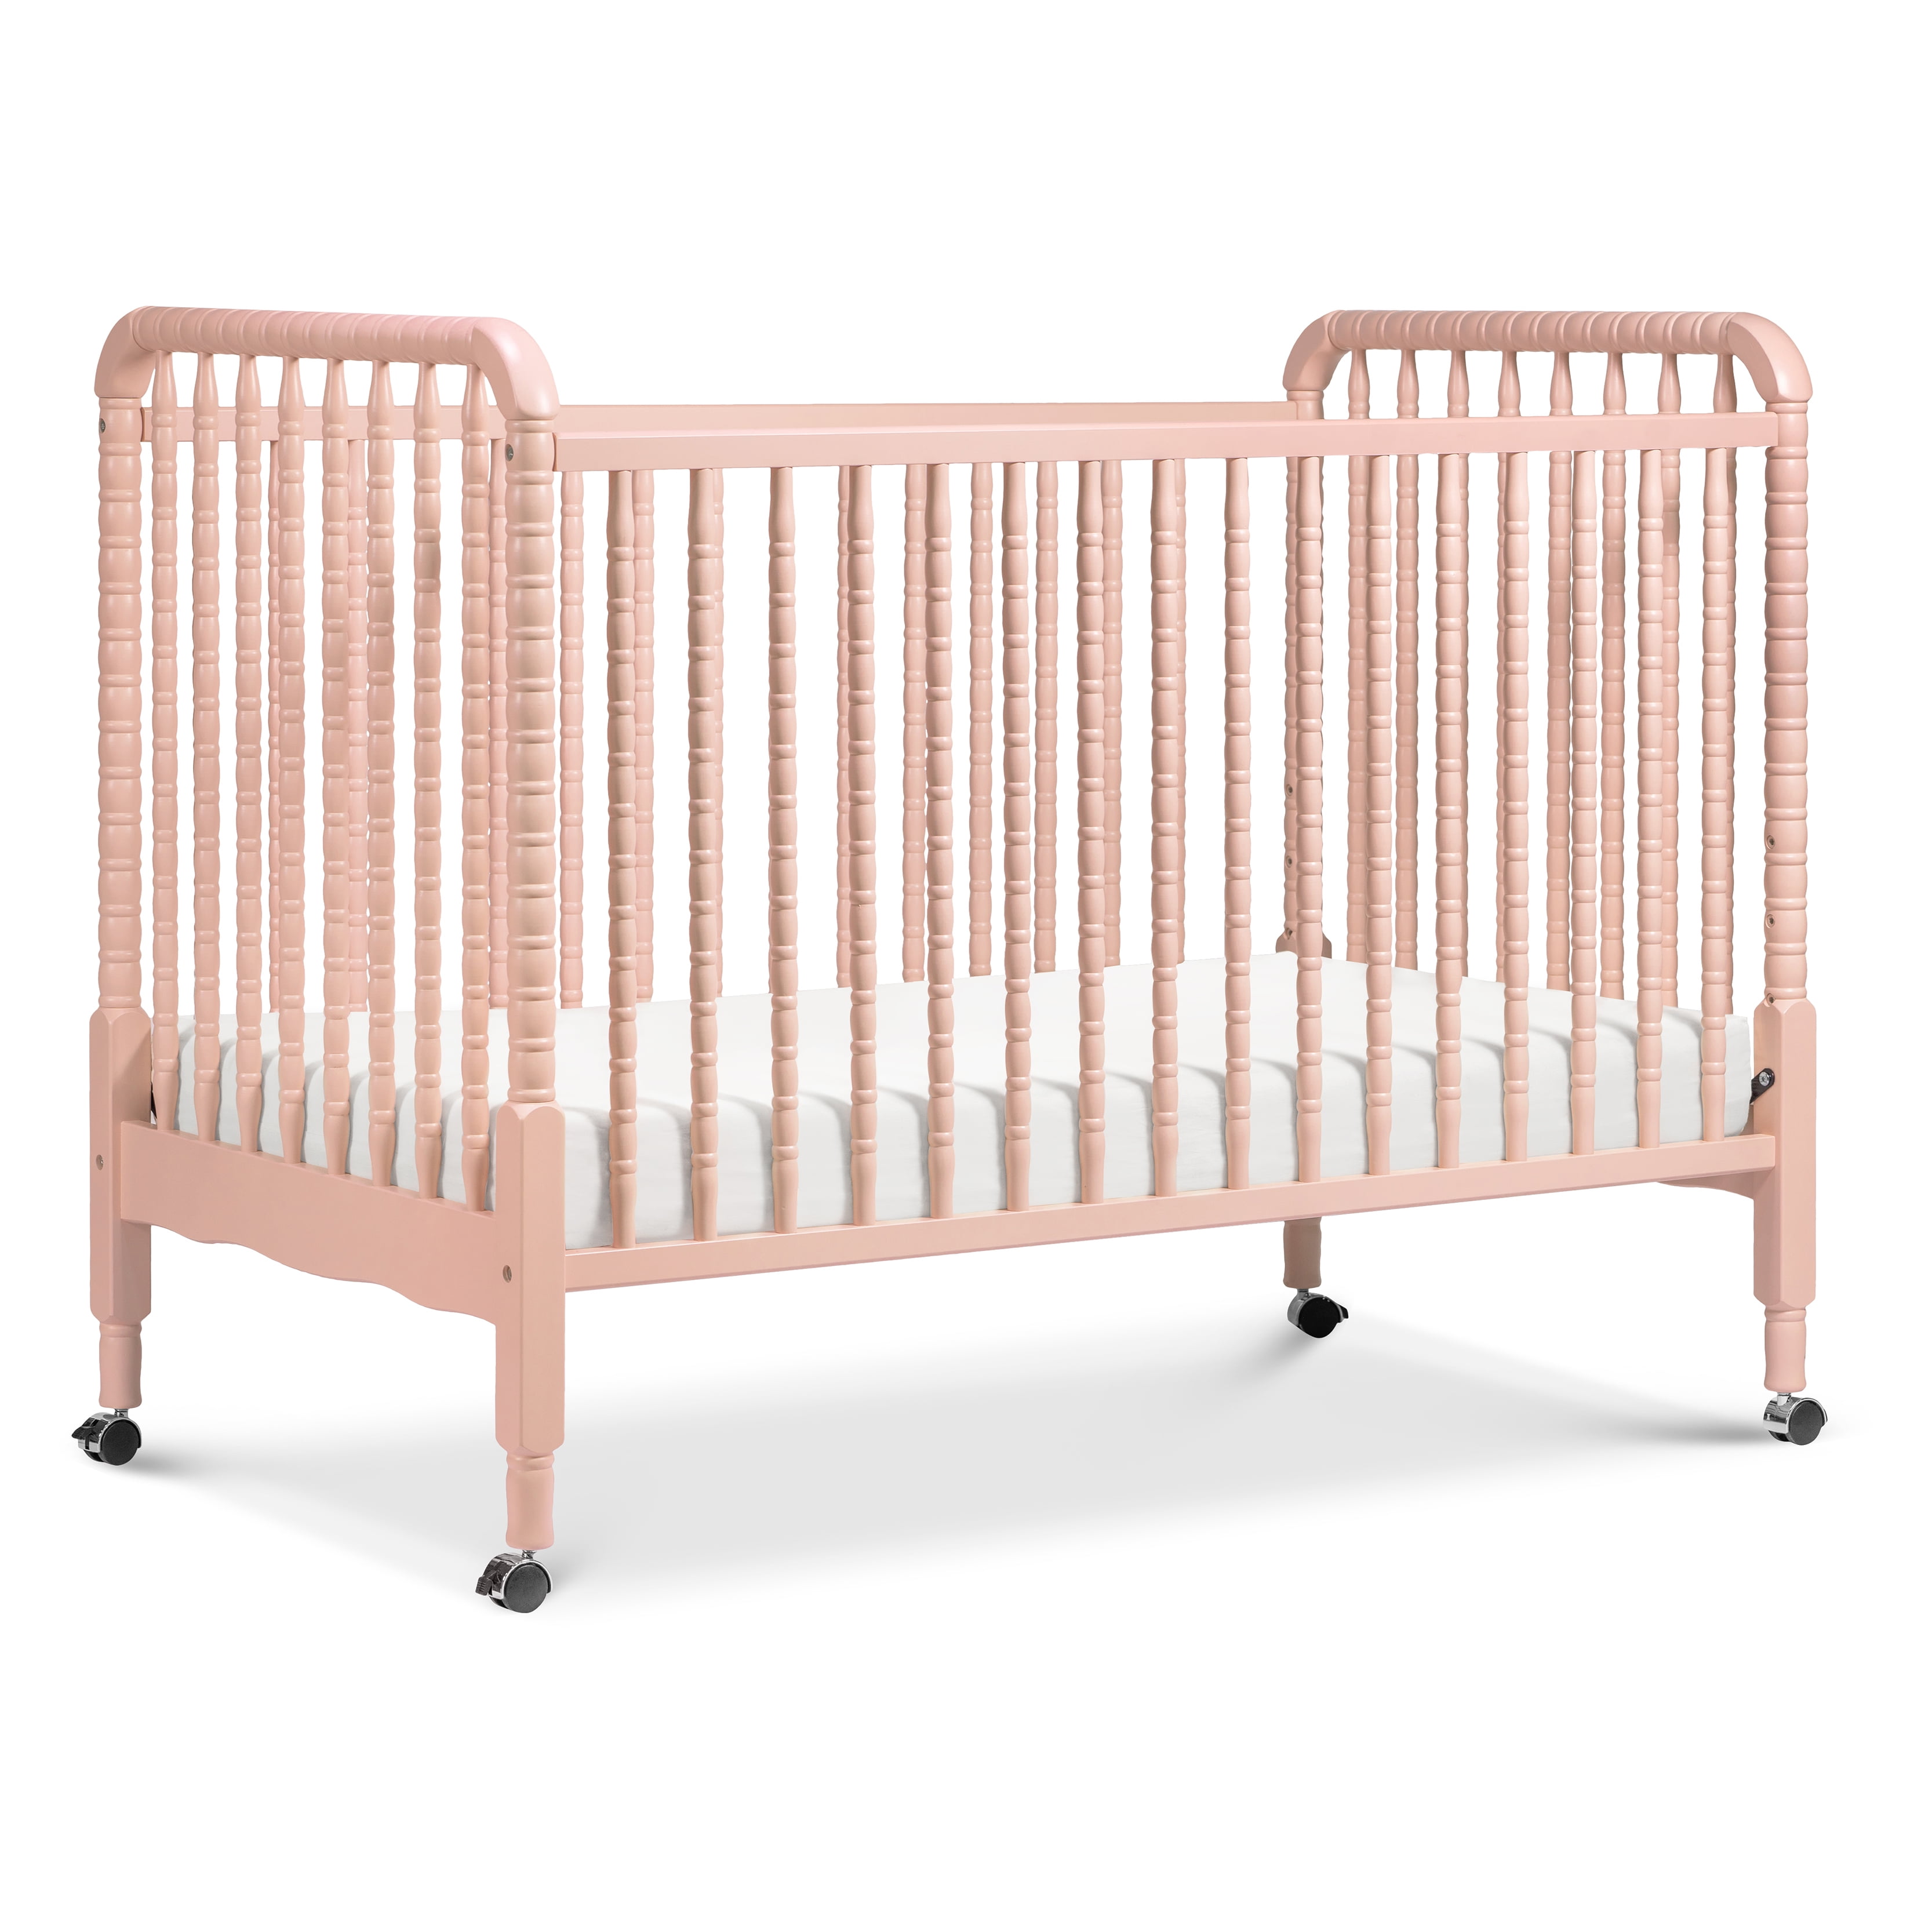 DaVinci Jenny Lind 3,in,1 Convertible Portable Crib in Blush Pink Greenguard Gold Certified 4-Adjustable Mattress Positions 